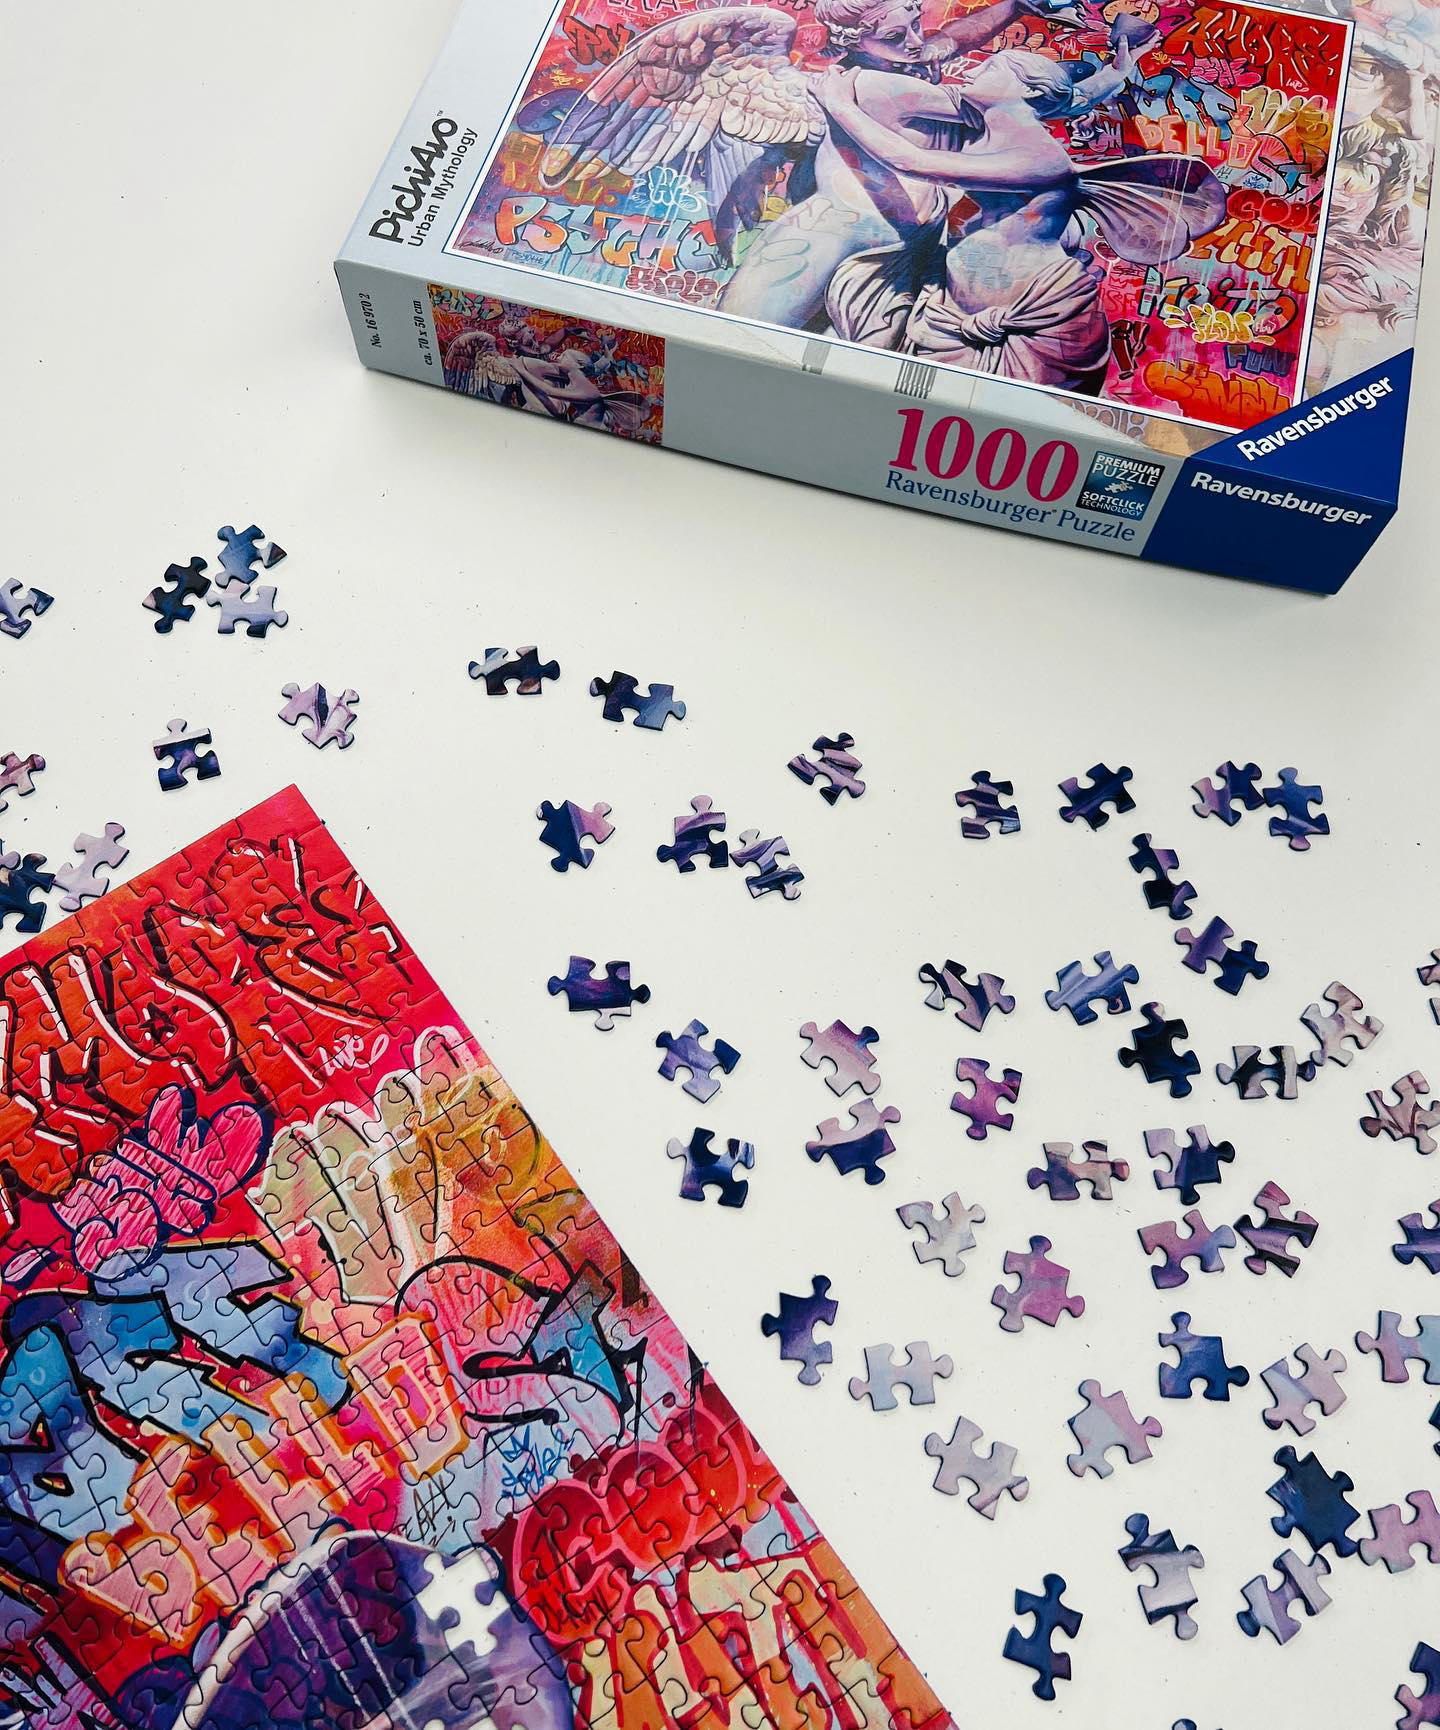 image  1 PichiAvo - We have made two puzzles with #ravensburgerglobal that gave us dozens of hours of fun